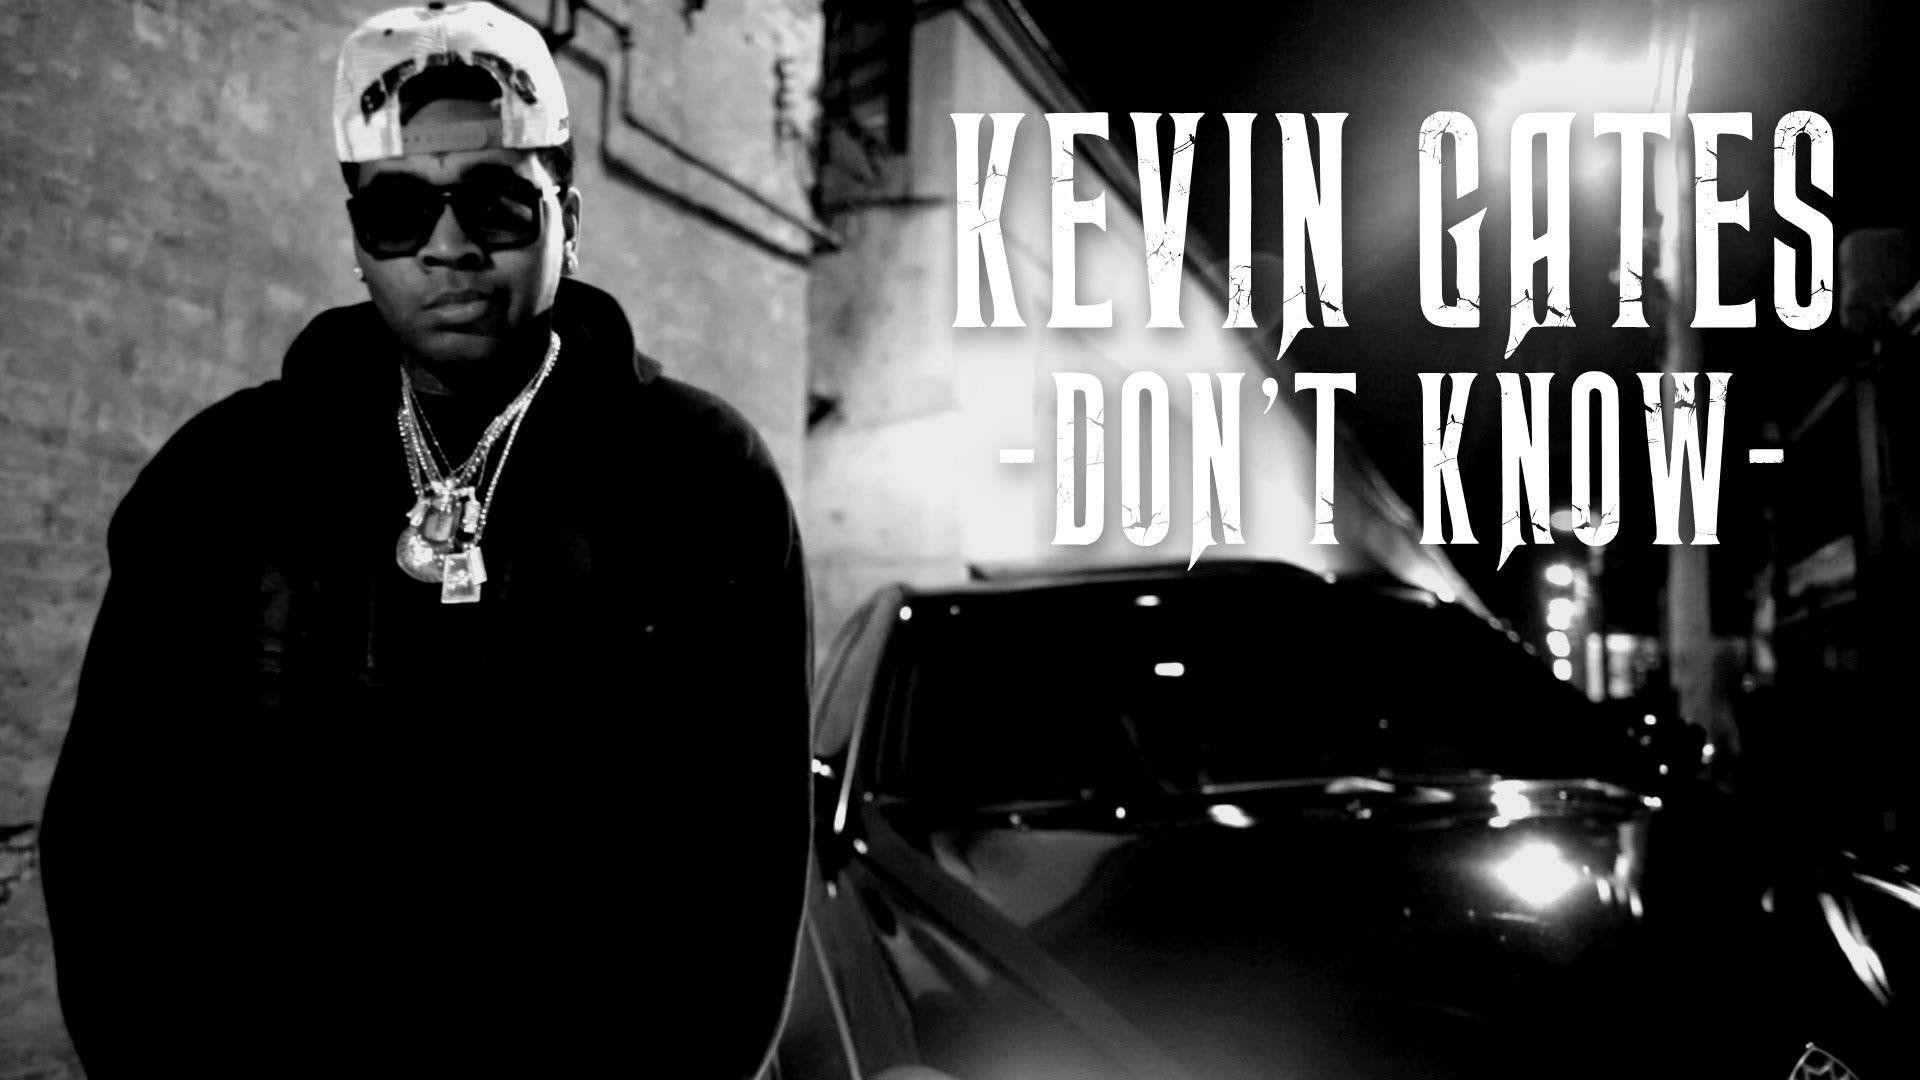 1920x1080 Download Kevin Gates Wallpaper background for your phone (iPhone .